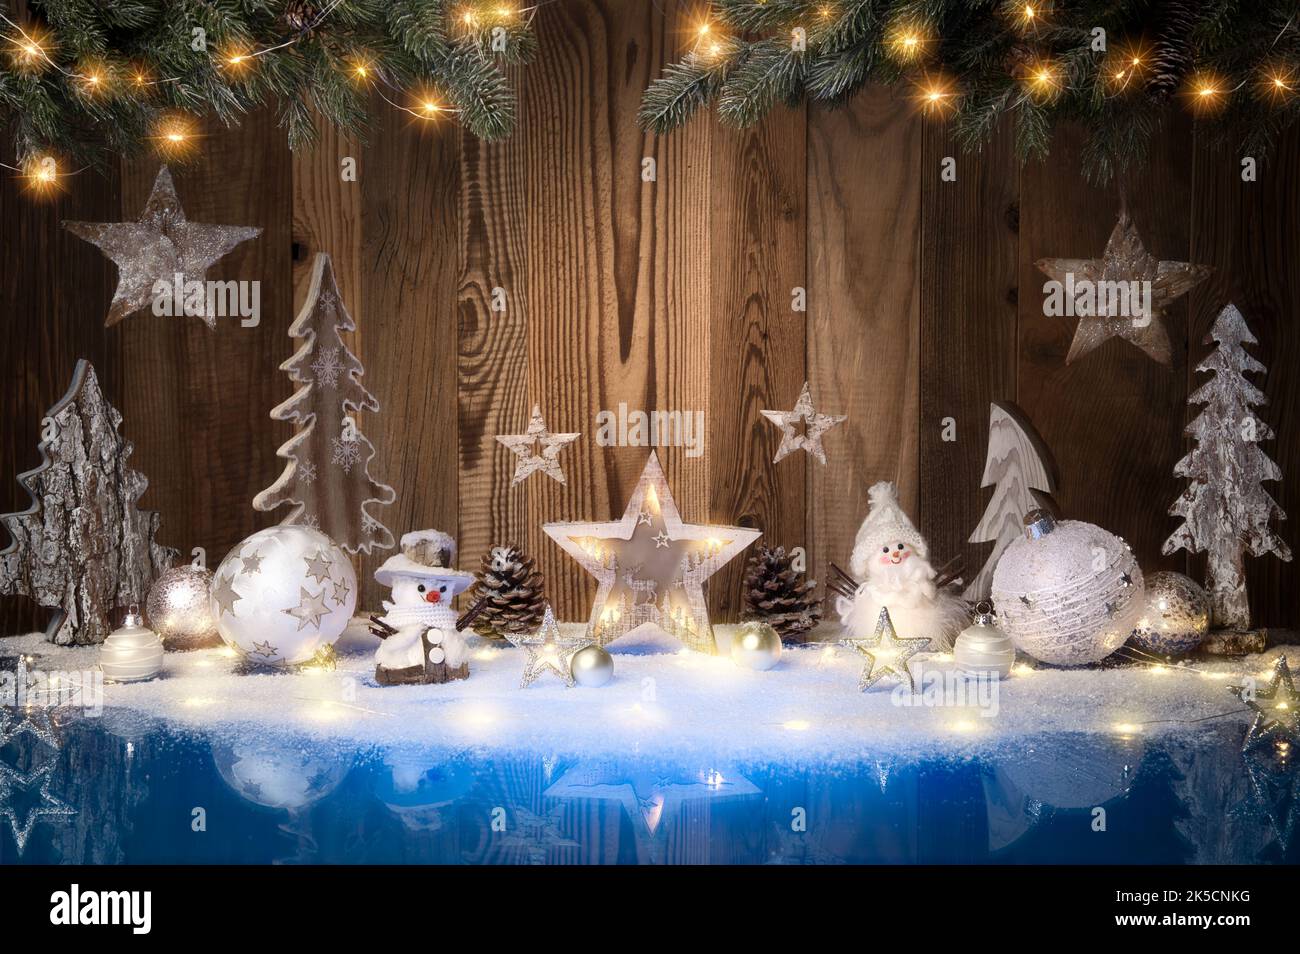 Christmas ornaments, lights and snow on blue surface and wooden background with copy space Stock Photo